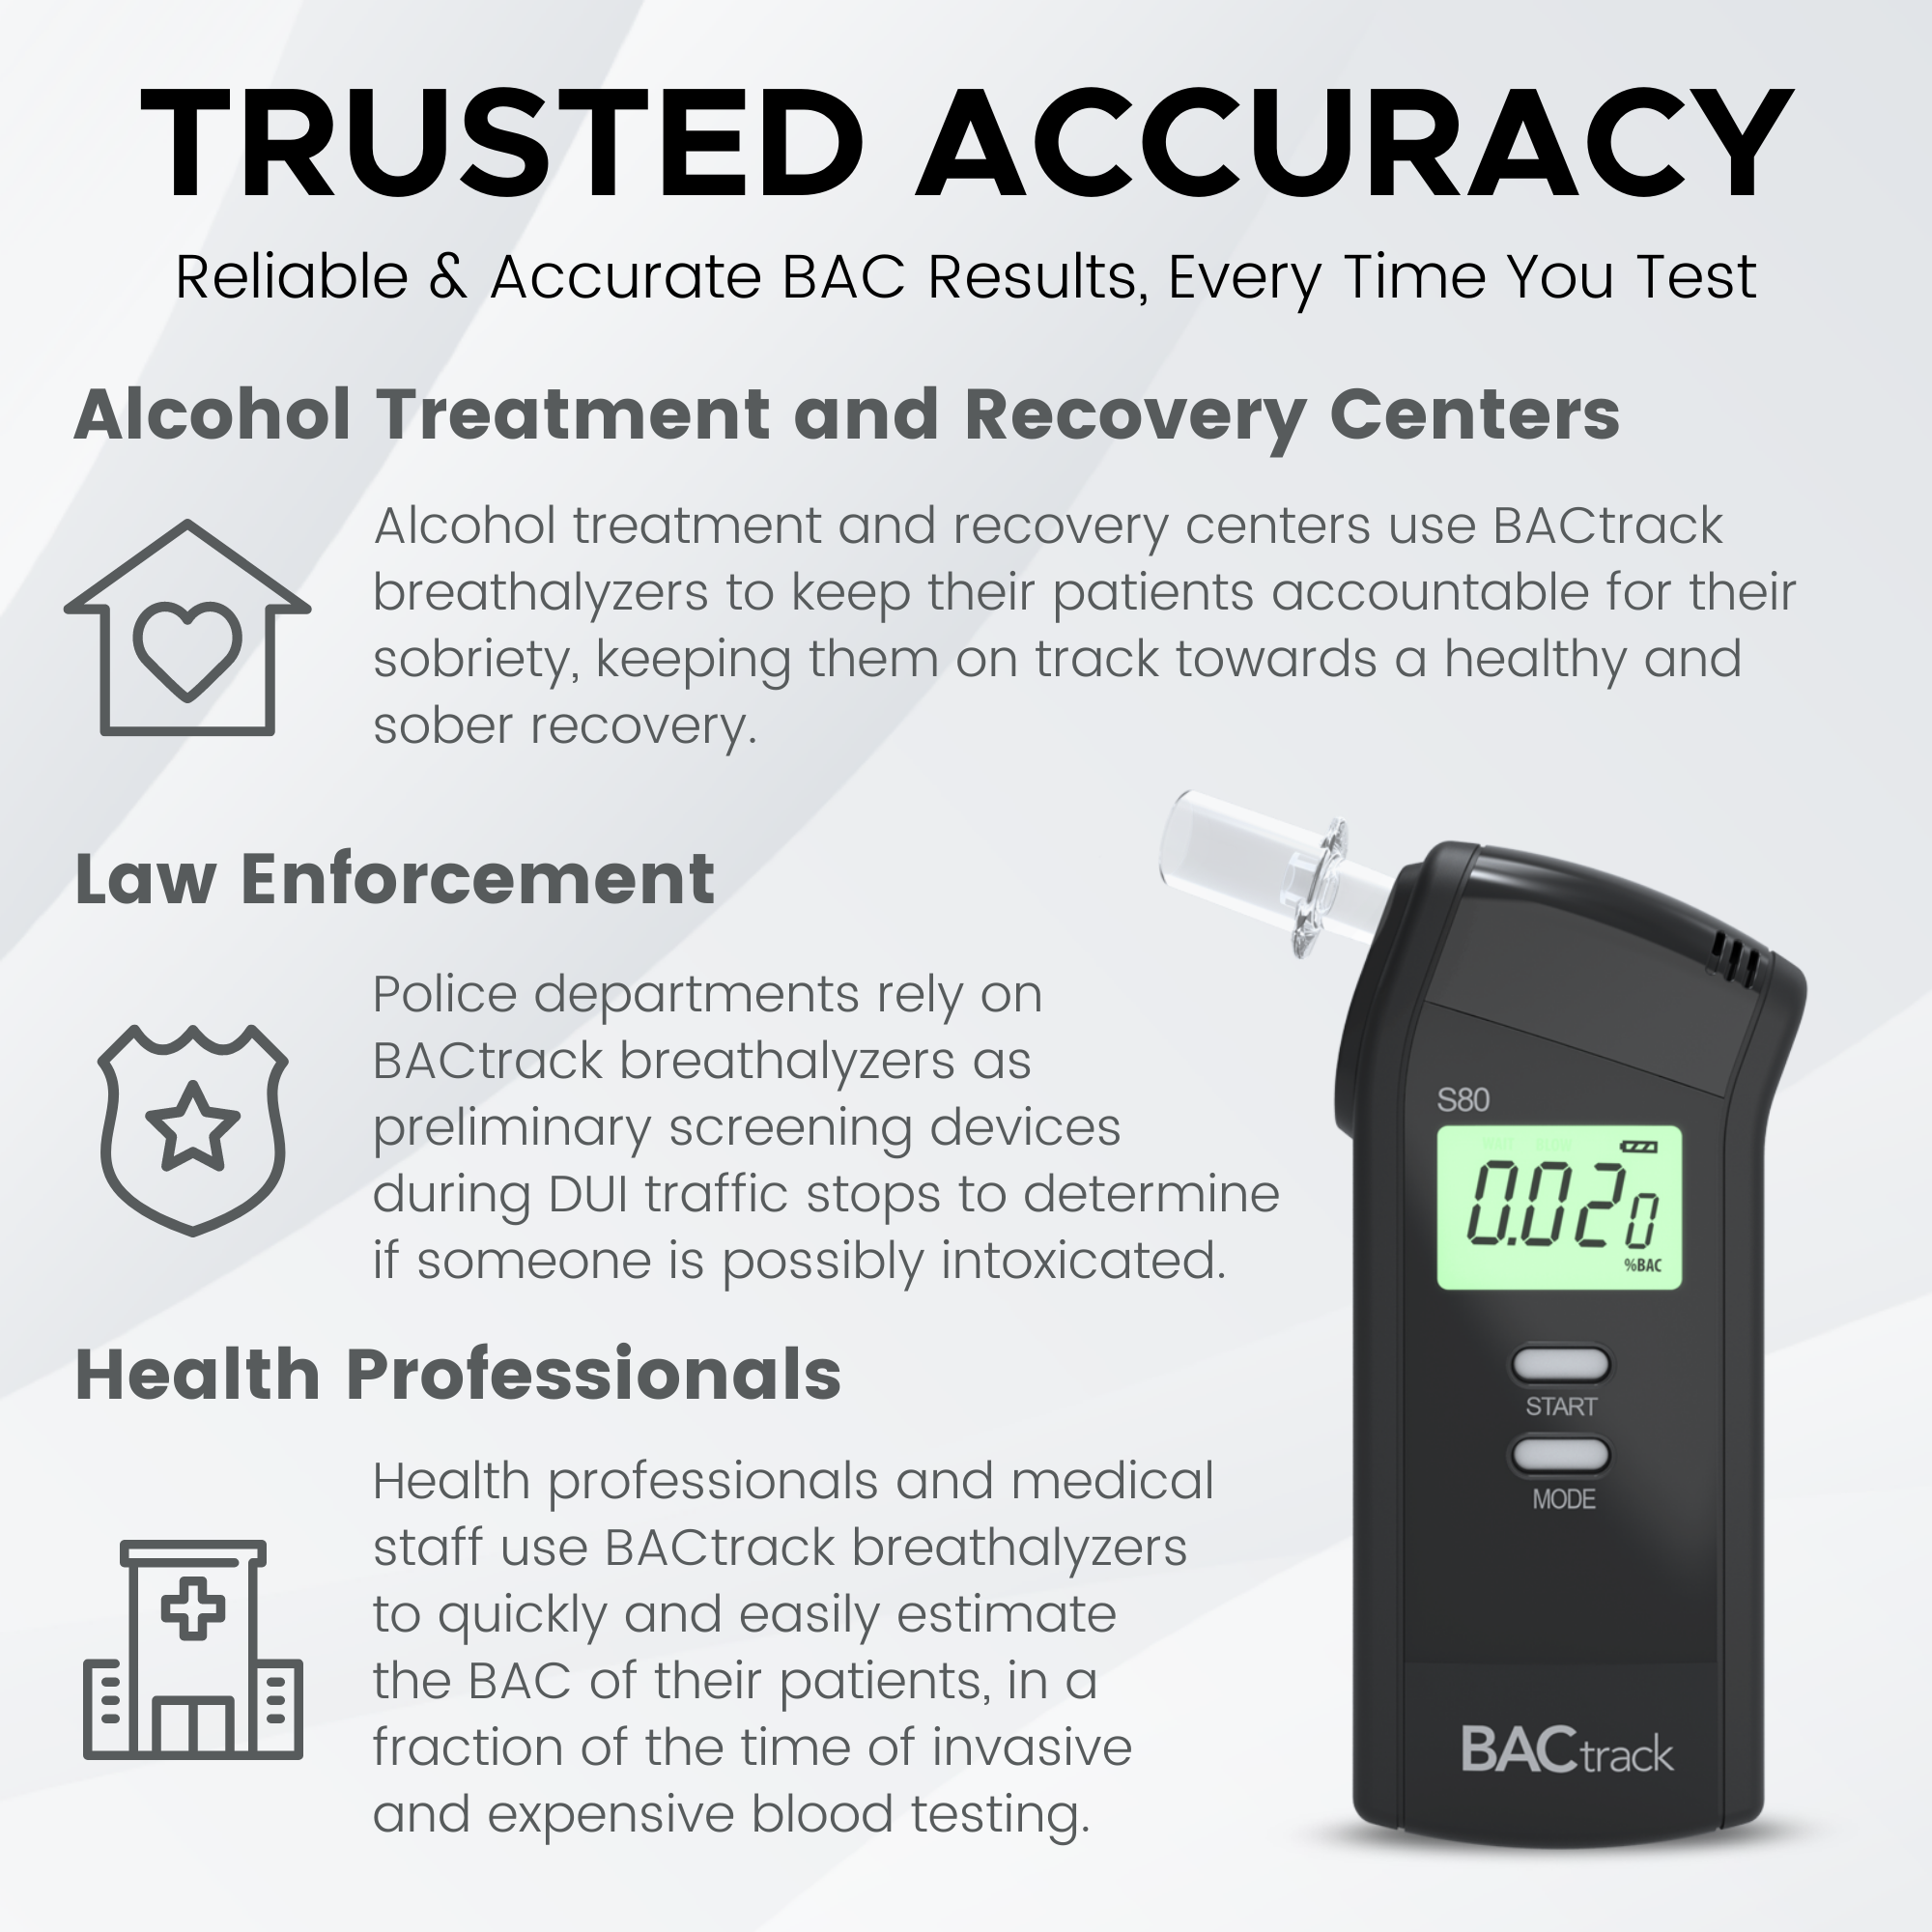 BACtrack S80 Breathalyzer | Professional-Grade Accuracy | DOT & NHTSA Approved | FDA 510(k) Cleared | Portable Breath Alcohol Tester for Personal & Professional Use - image 4 of 10